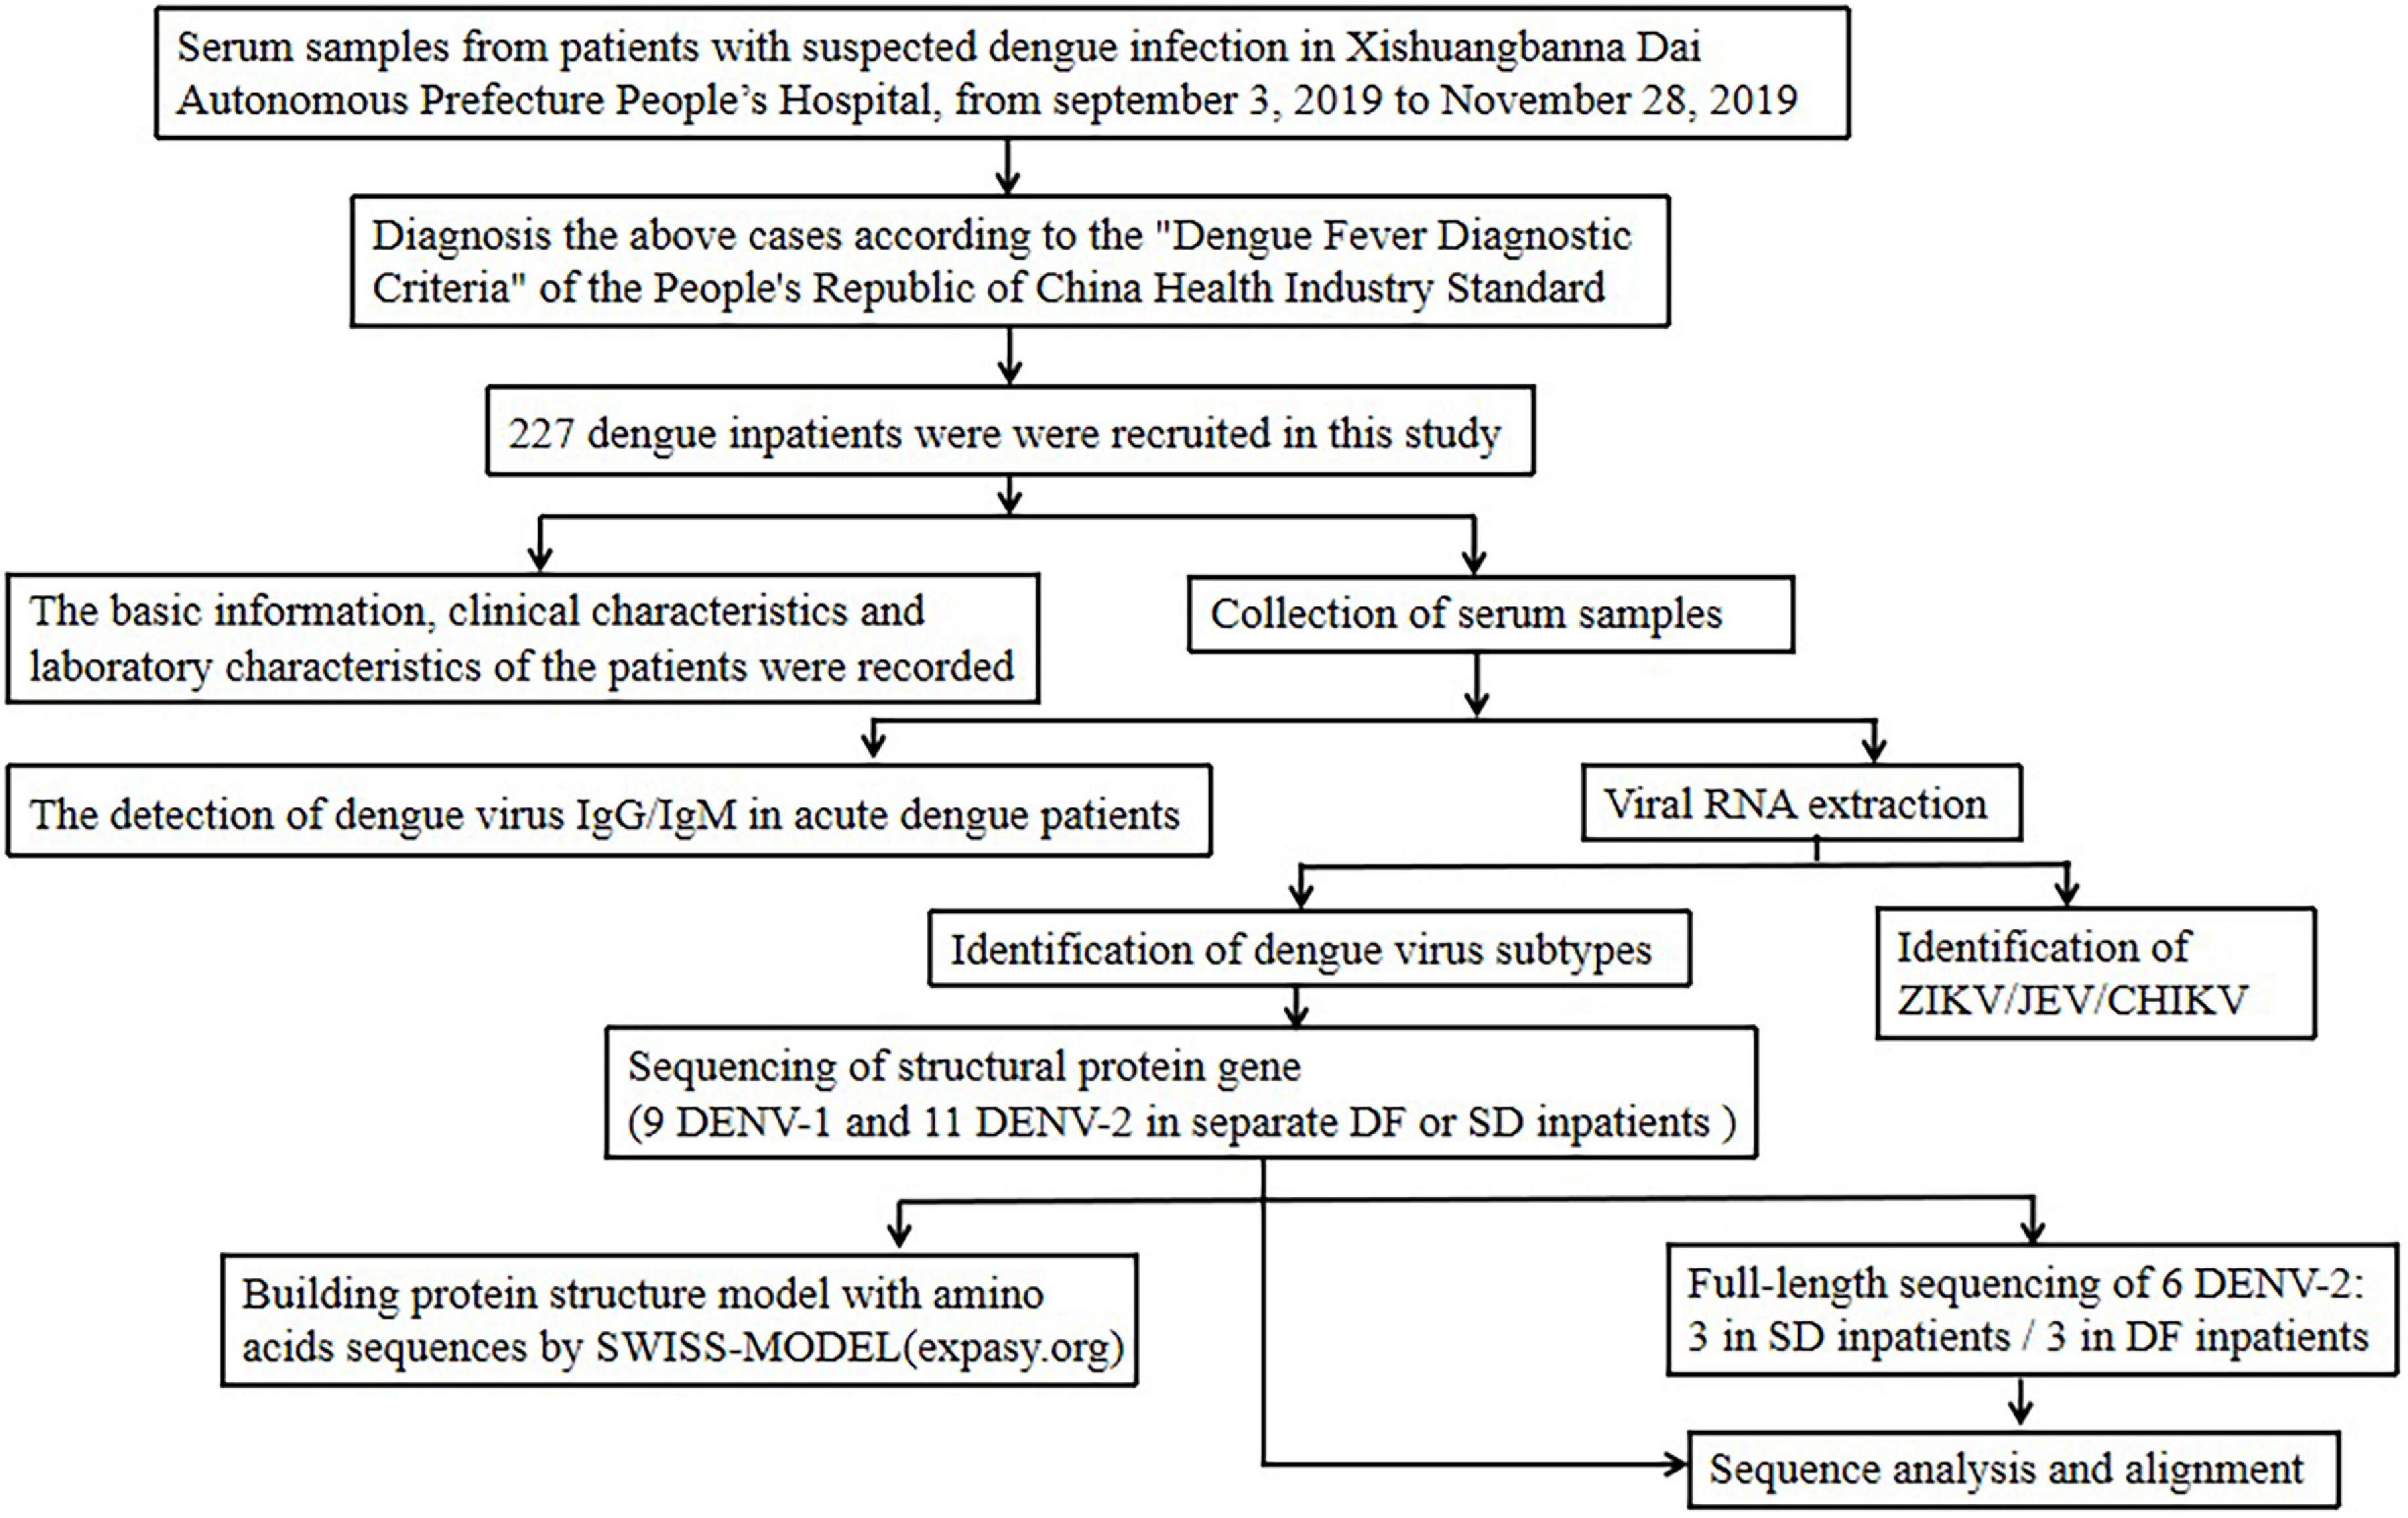 dengue related research papers